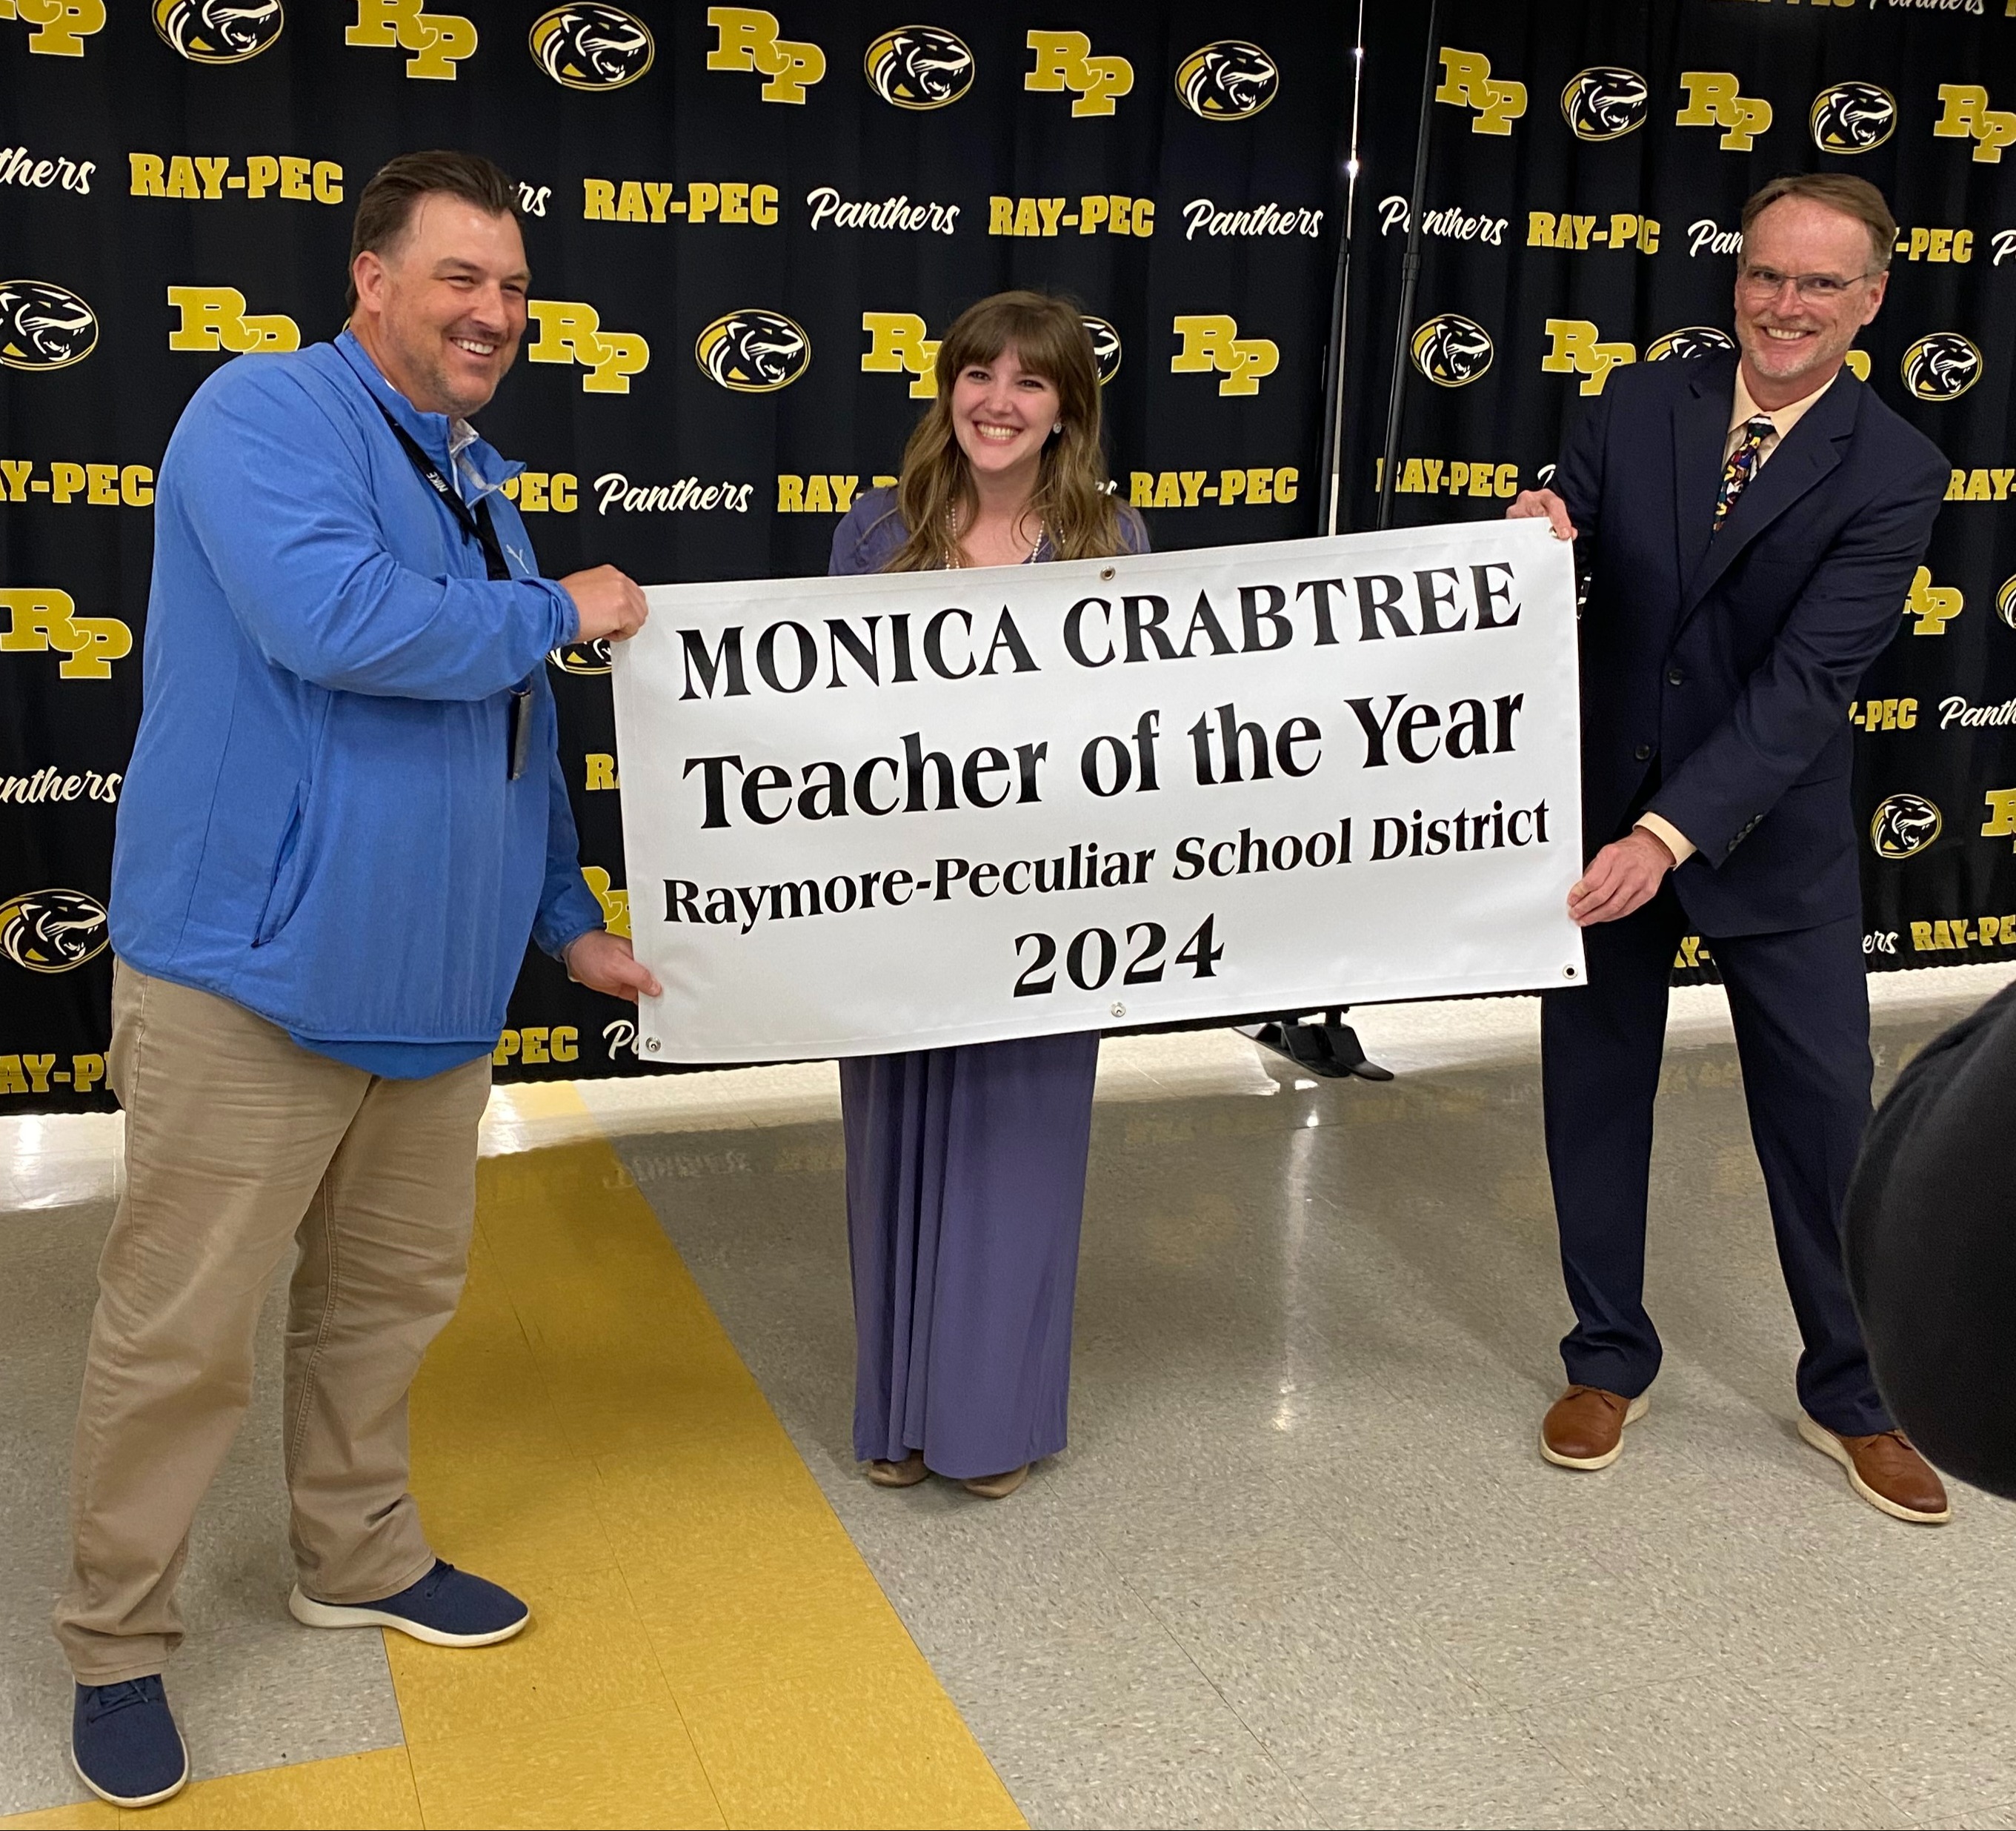 Teacher of the Year with Monica Crabtree